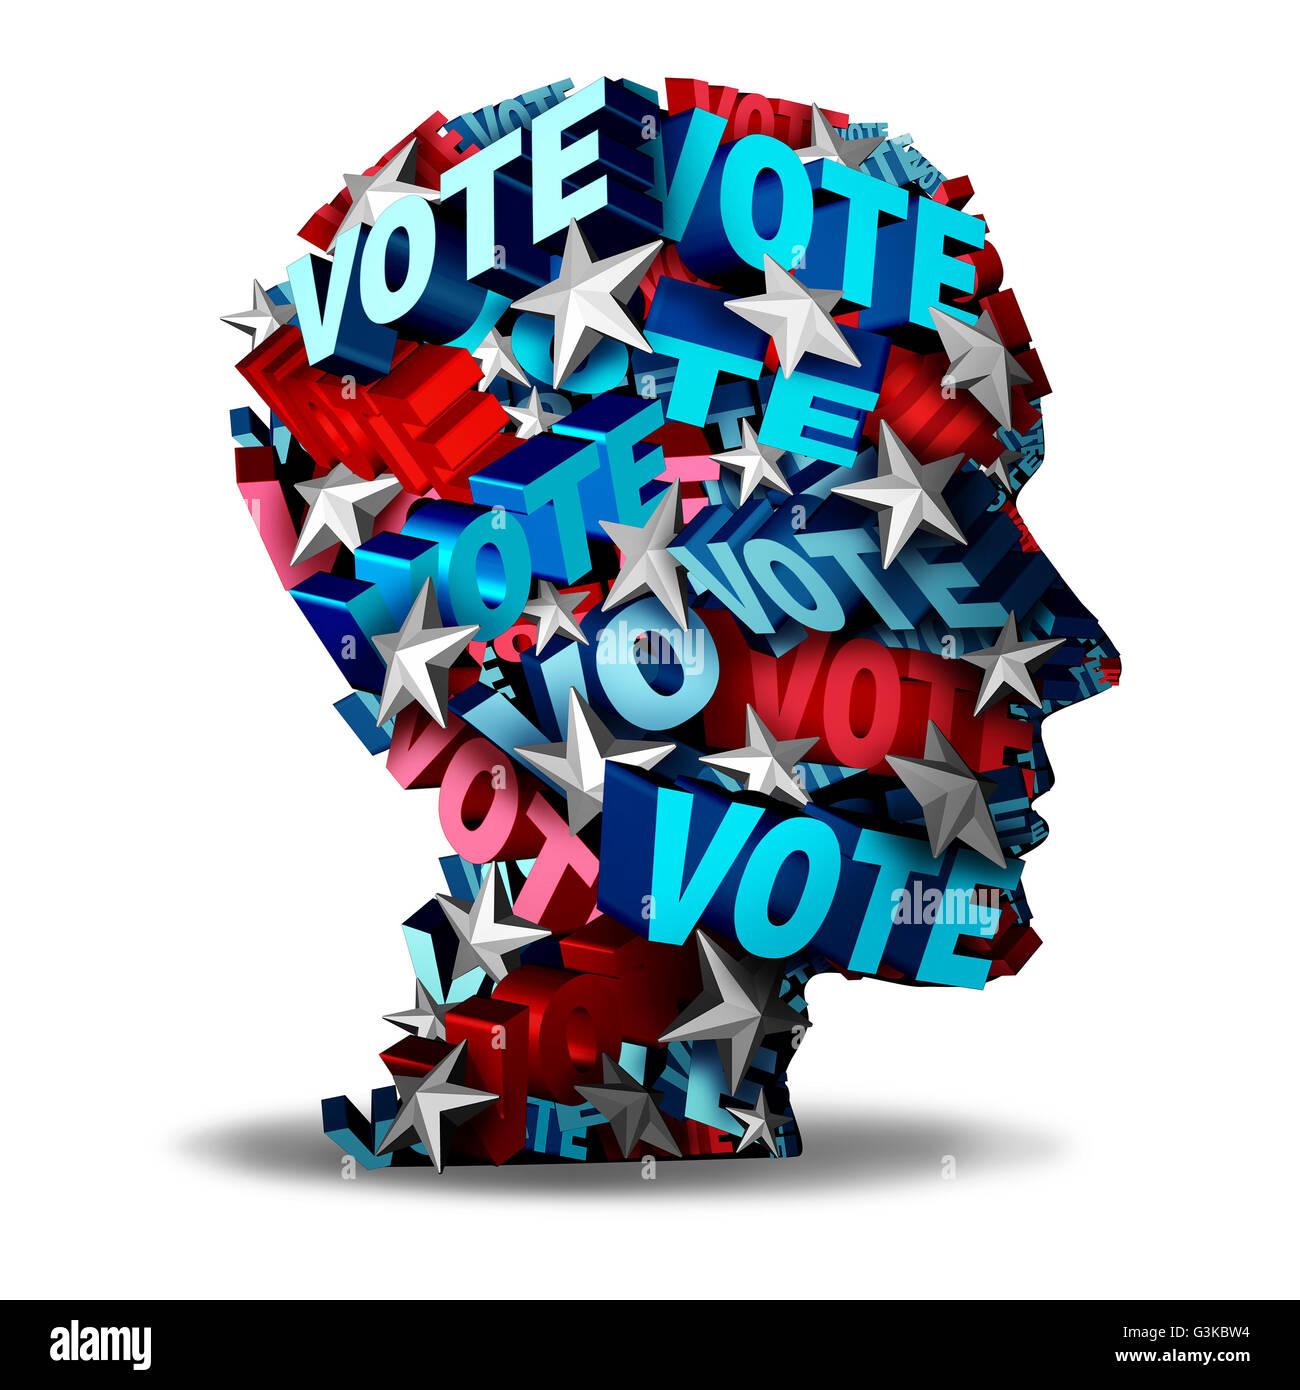 Vote concept and voting symbol as a group of 3D illustration text and stars representing a voter or candidate for an election. Stock Photo